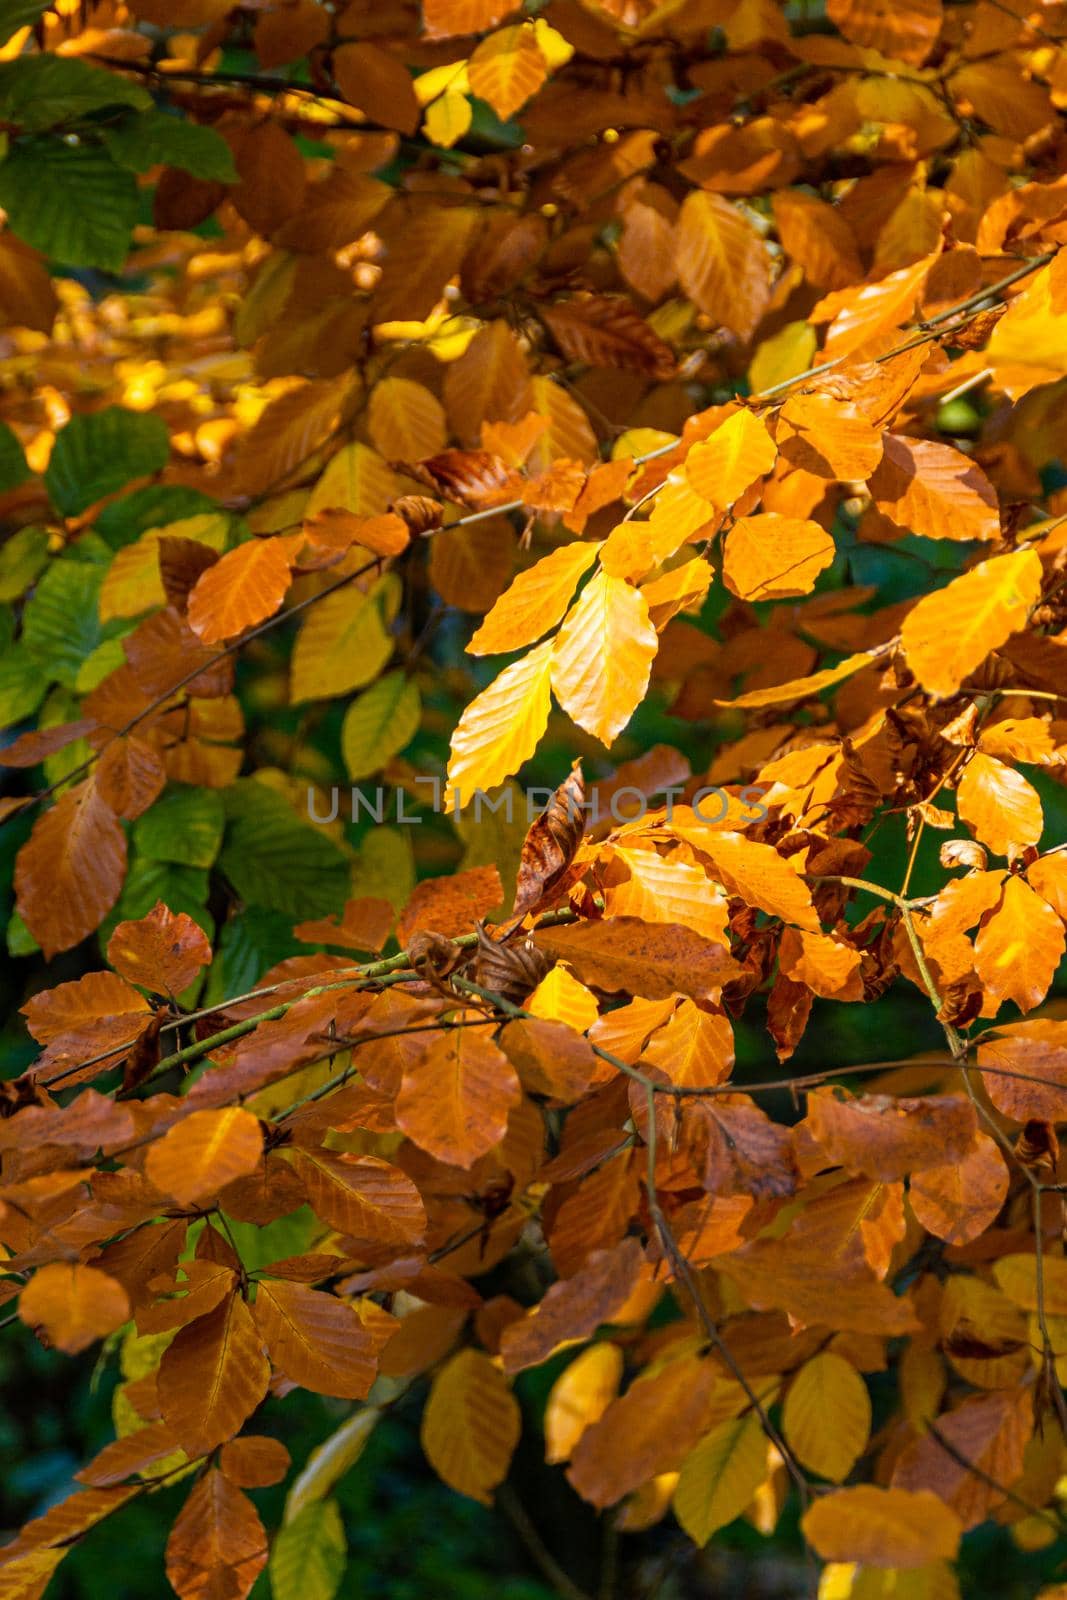 An image focusing on the warm colors of leaves during the autumn season